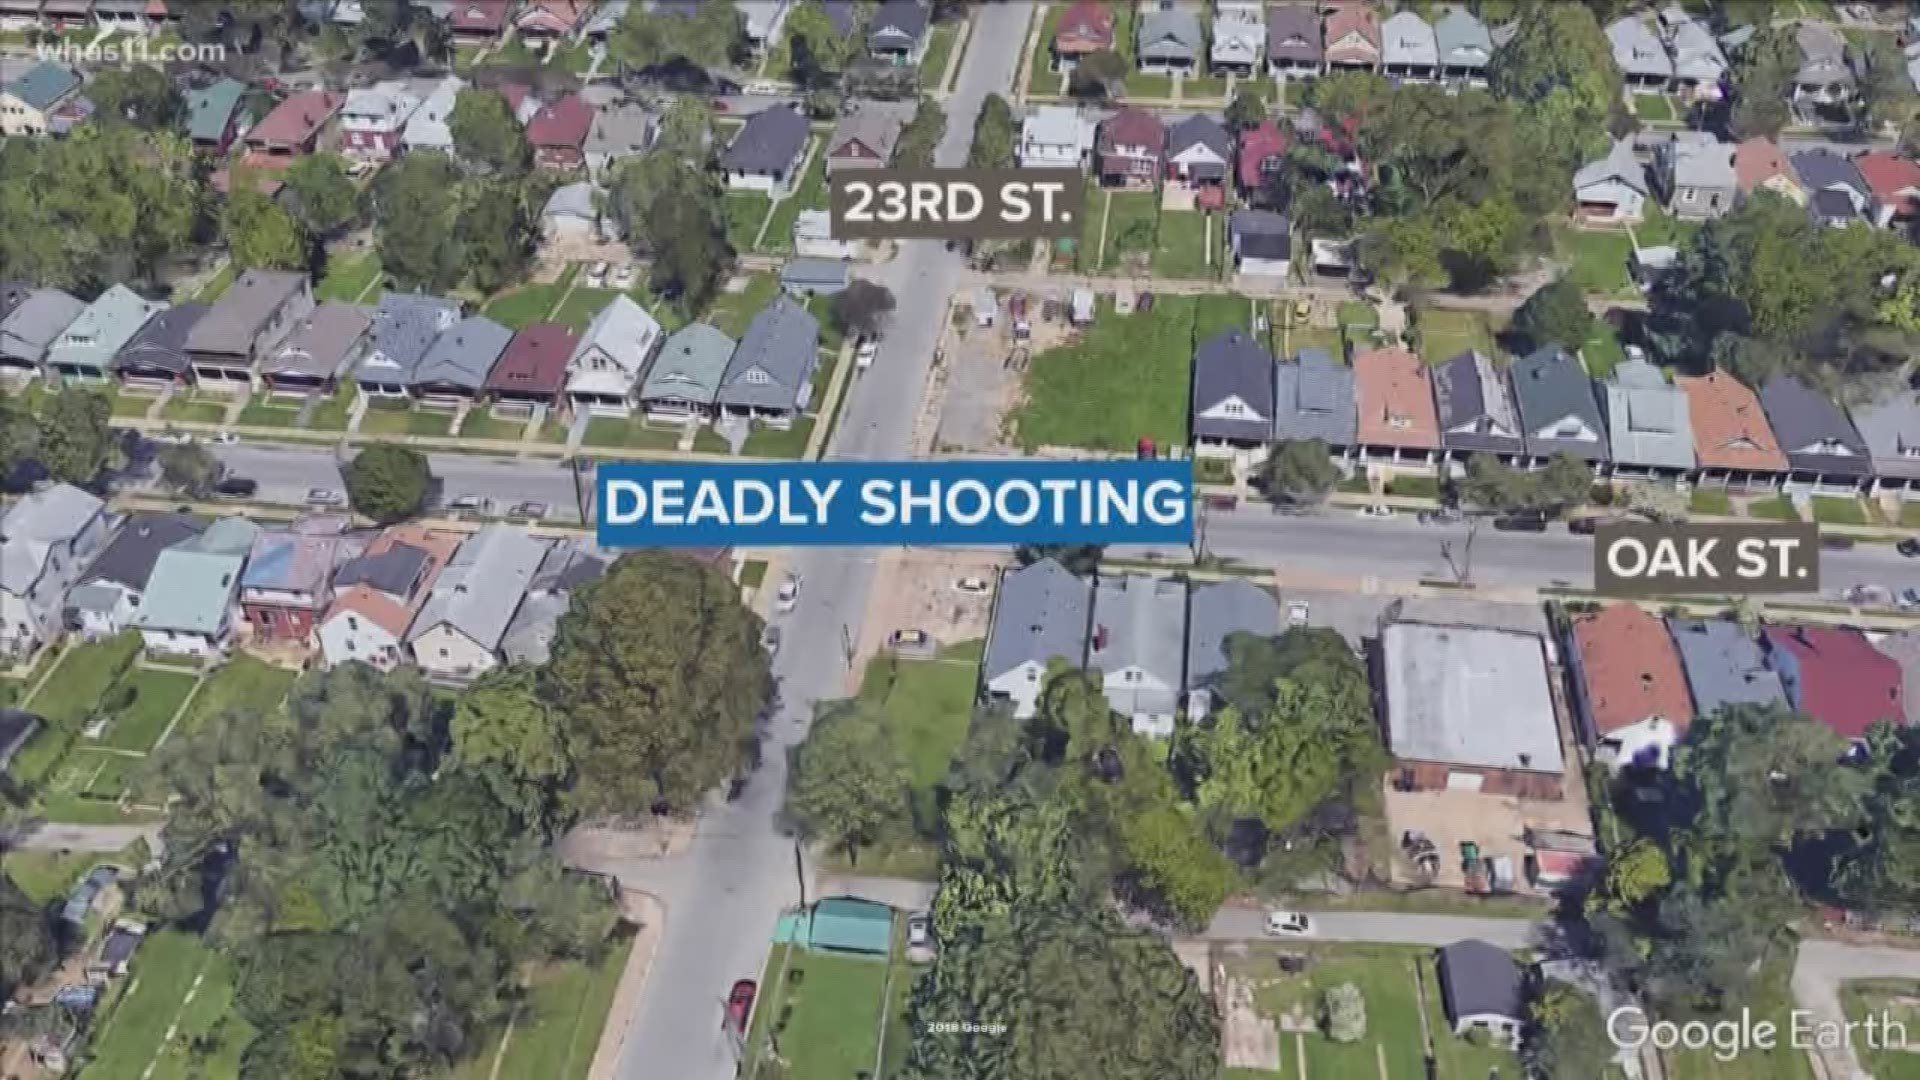 Louisville Metro Police are investigating a deadly shooting in Louisville's Park Hill neighborhood.